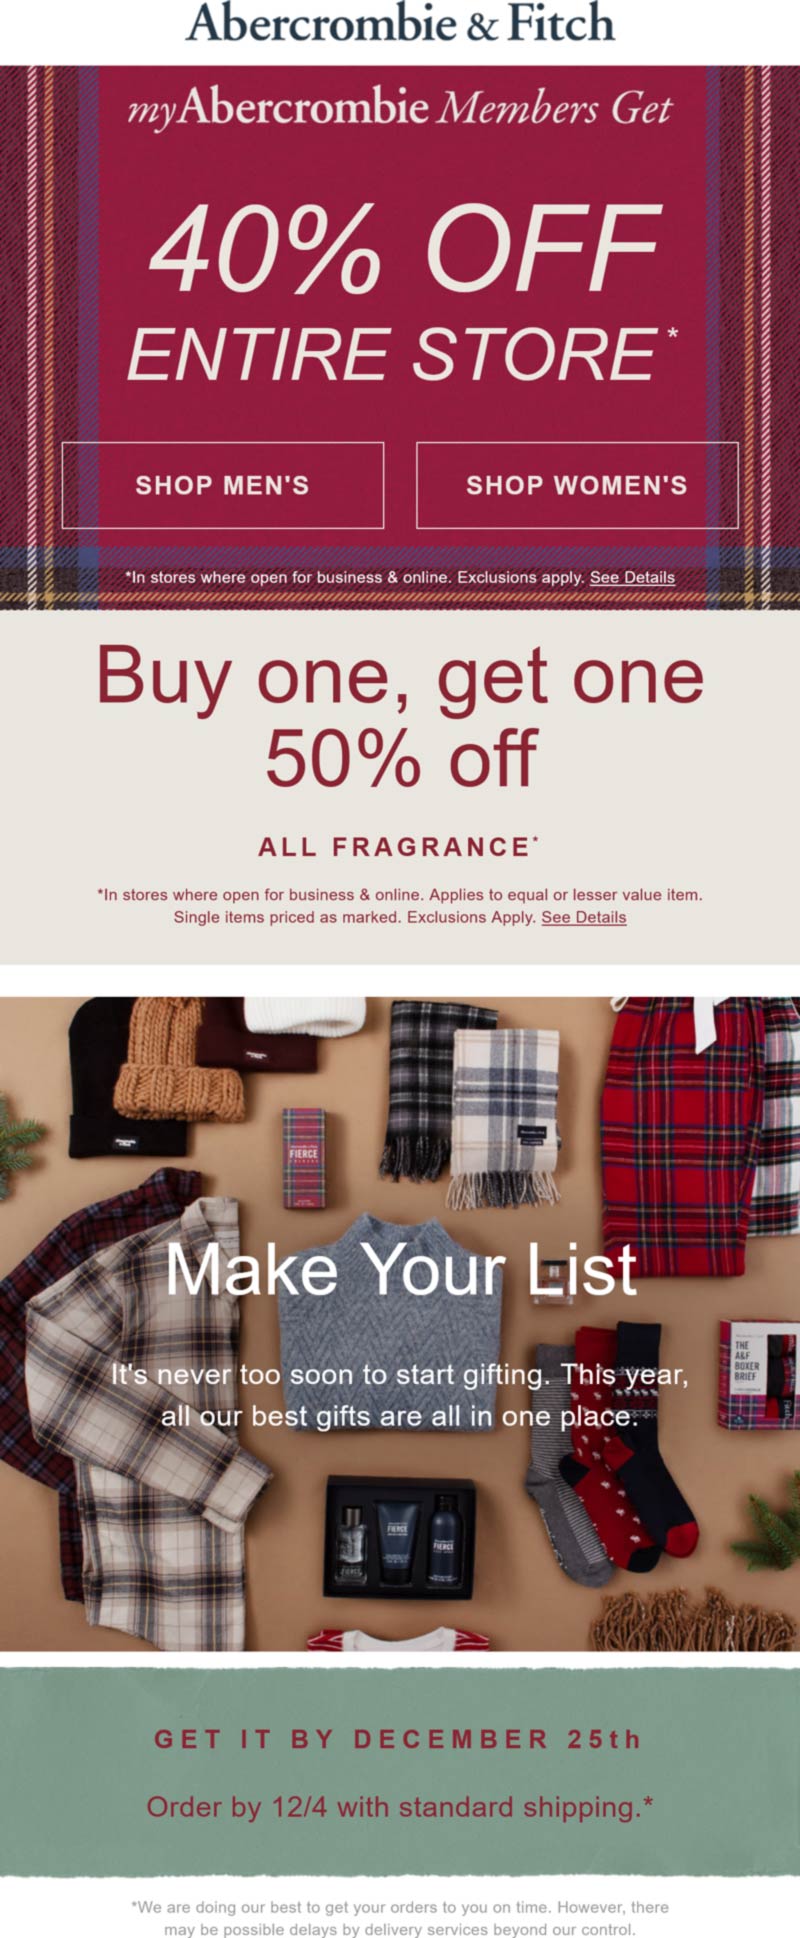 [August, 2021] 40 off everything at Abercrombie & Fitch, ditto online